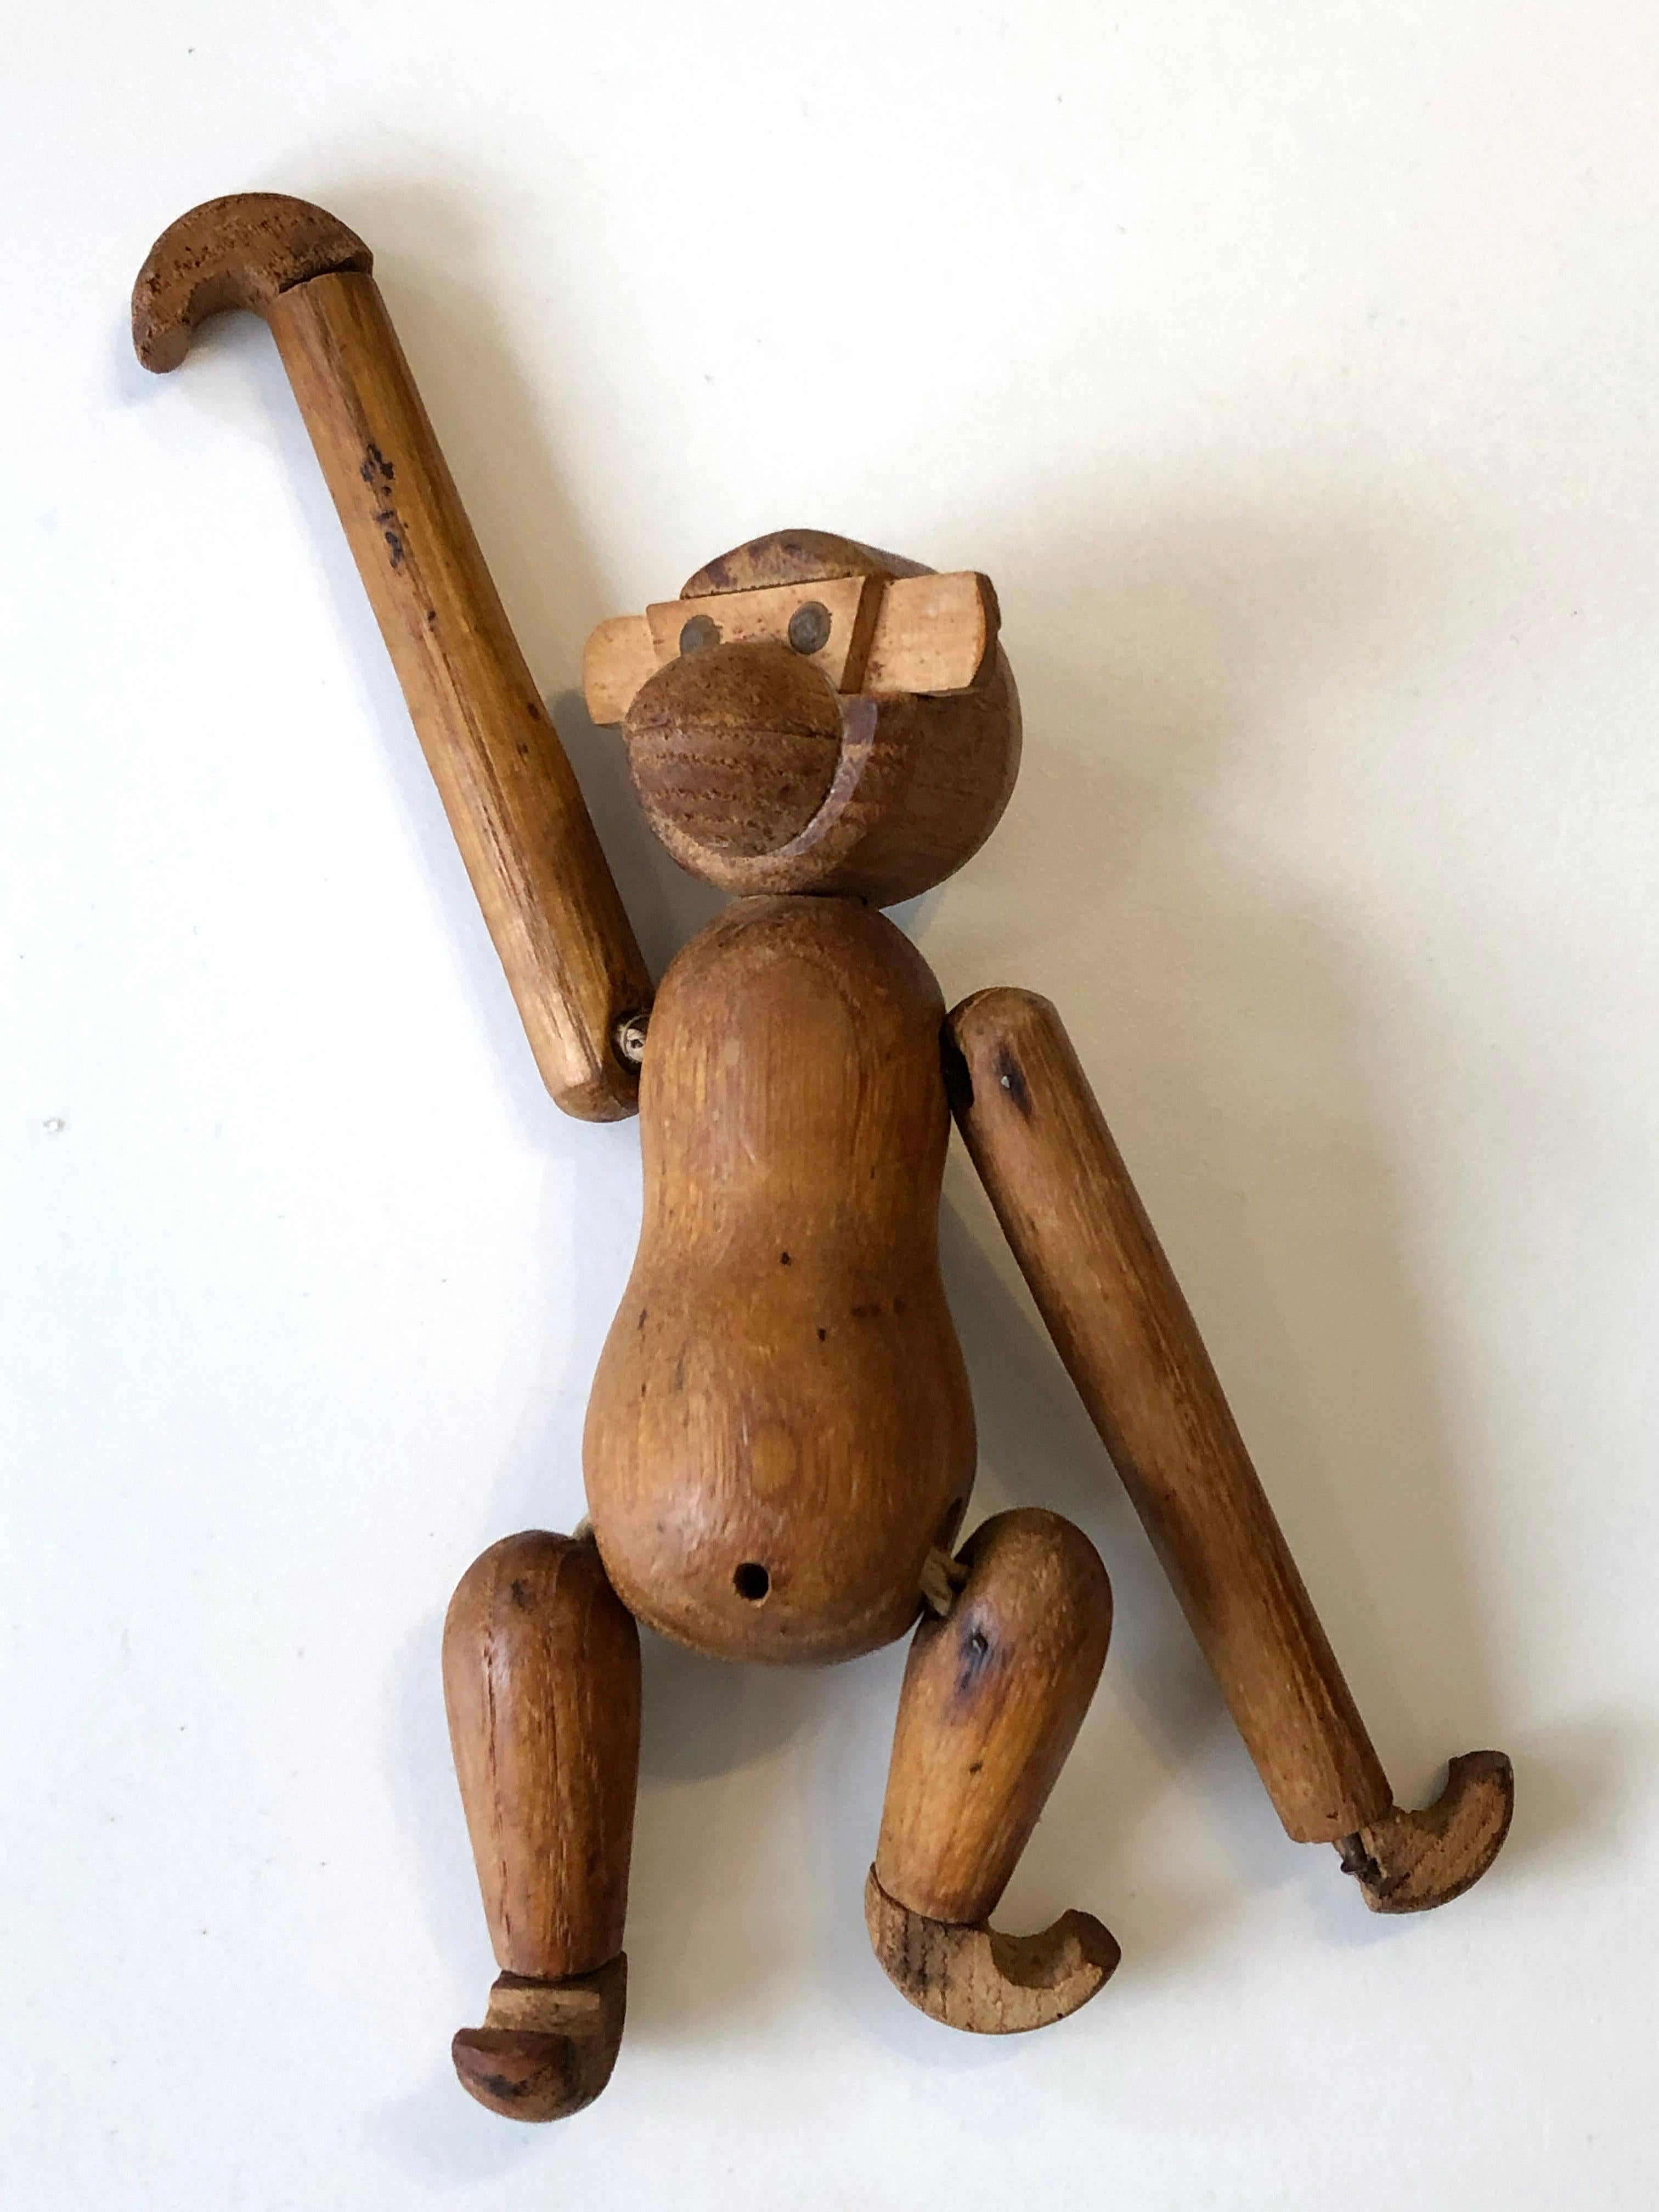 Vintage 1950's small wooden monkey - Kay Bojesen style For Sale 2